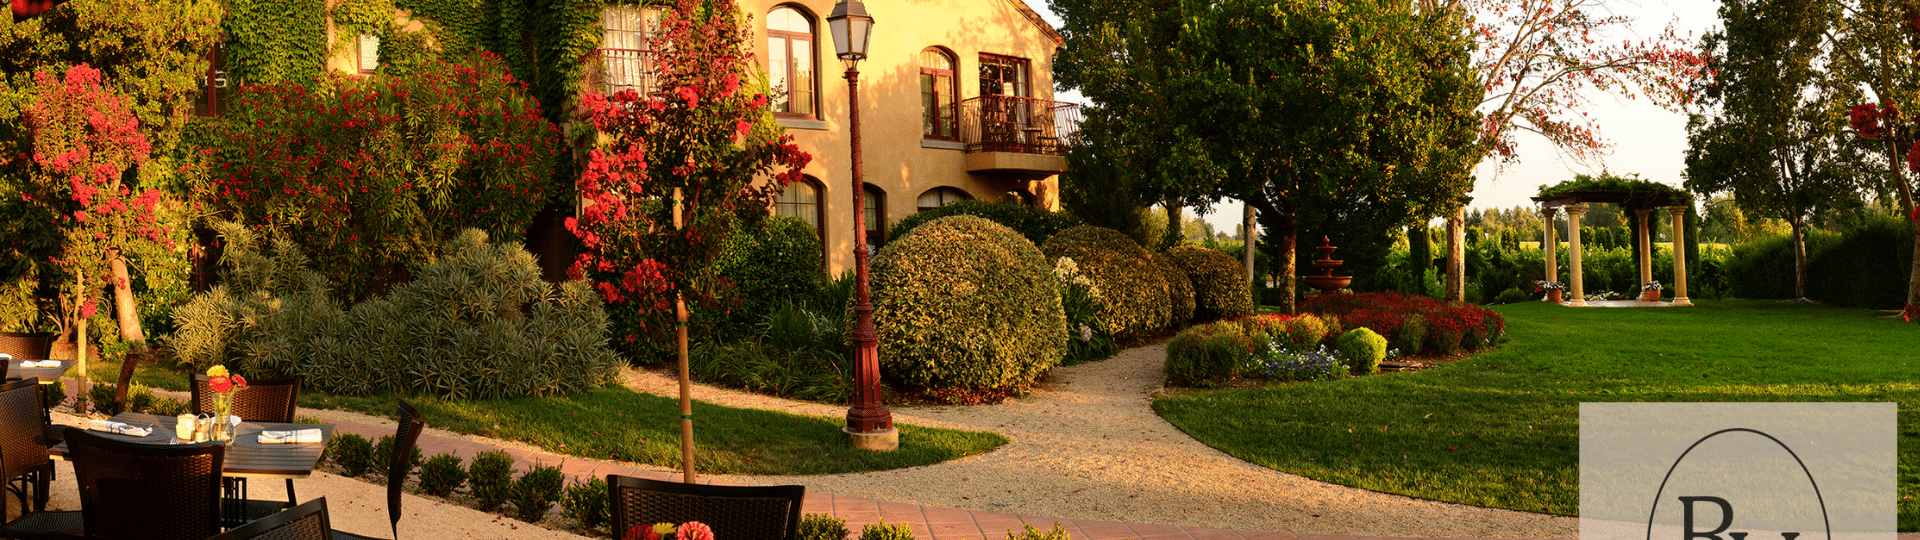 exterior of a wine country cafe